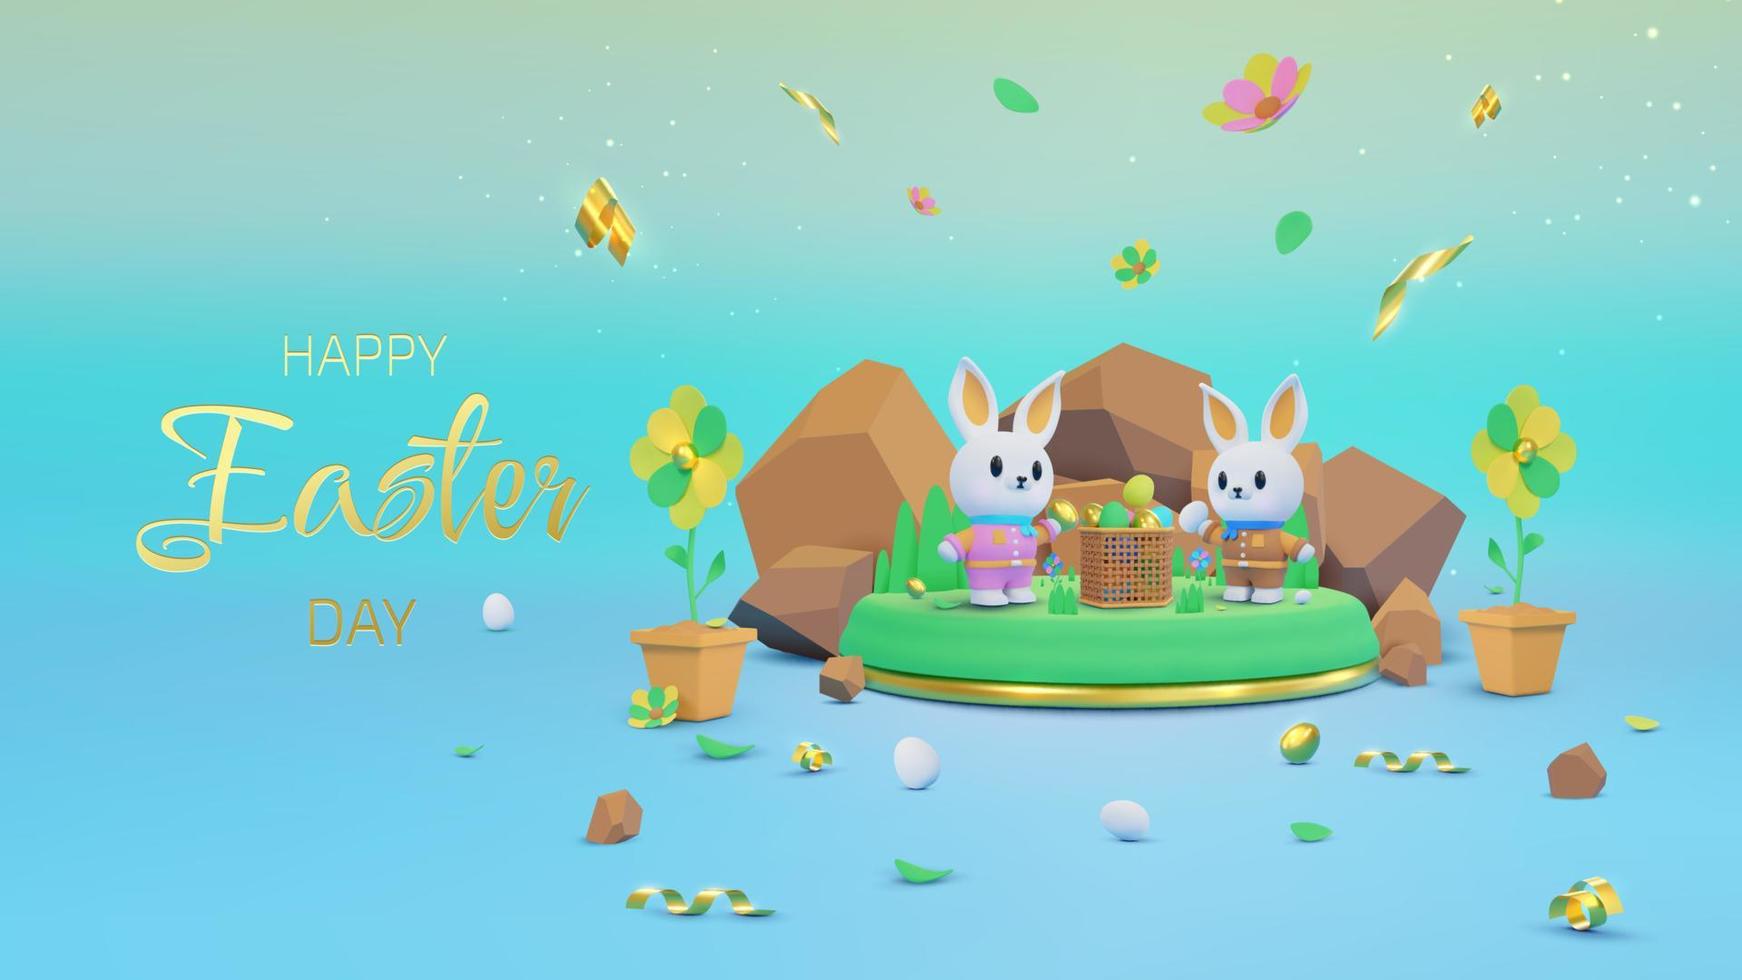 Colorful Easter background with two cute bunny elements standing on podium and decorated with flowers and eggs. vector